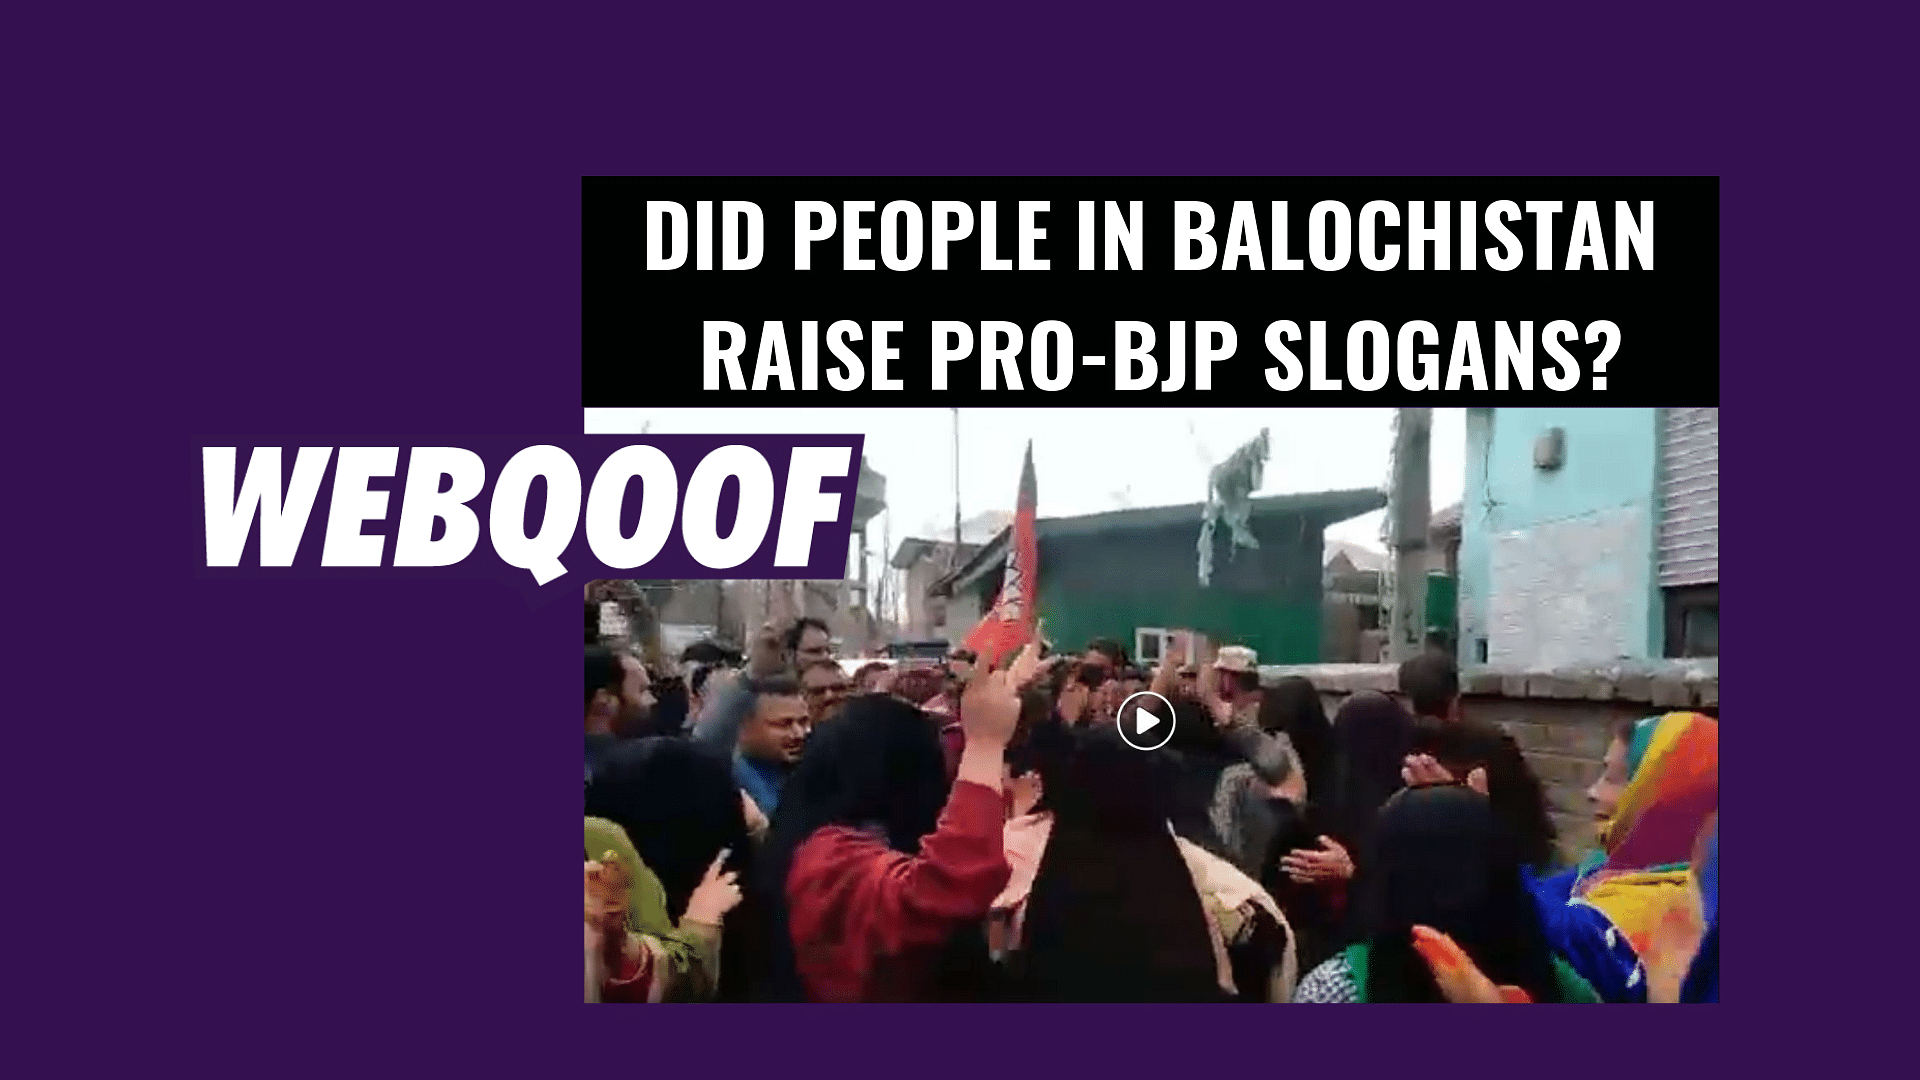 The slogans were raised on the day BJP candidate Sofi Yousuf had to file his nominations from Anantnag, Kashmir.